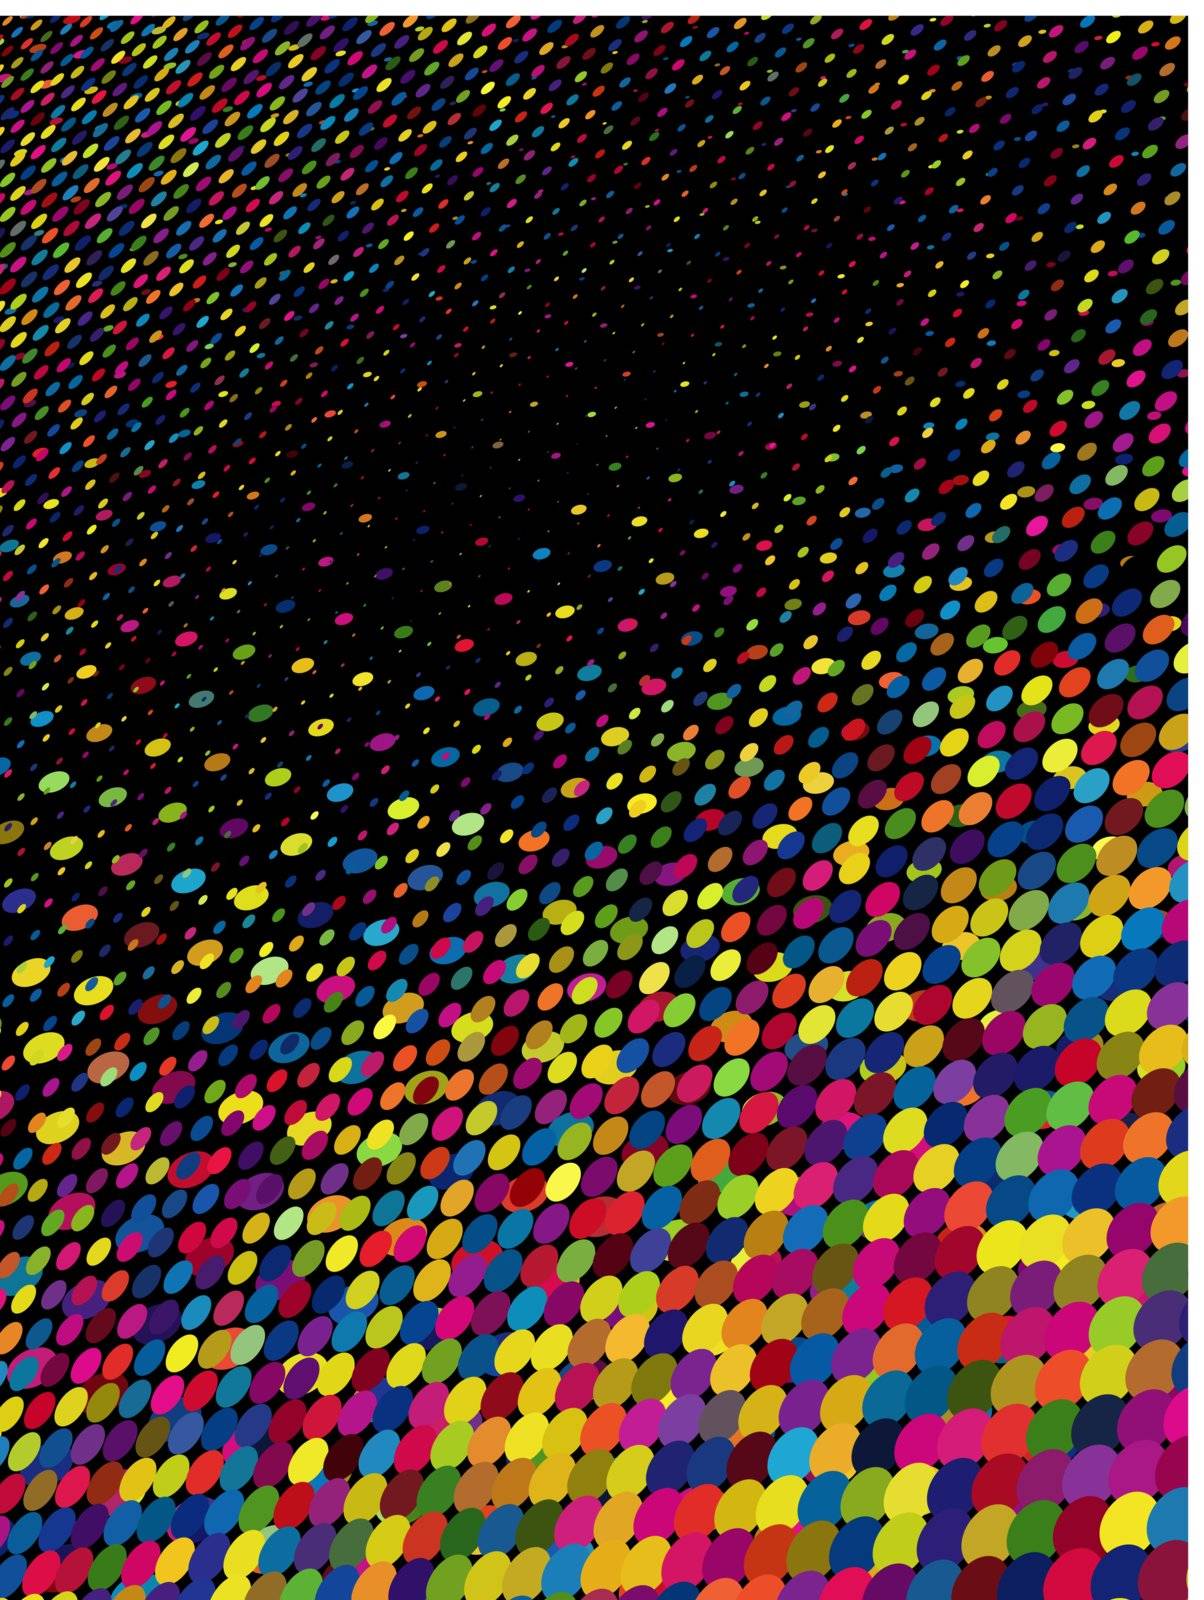 Rainbow dots. EPS 8 vector file included